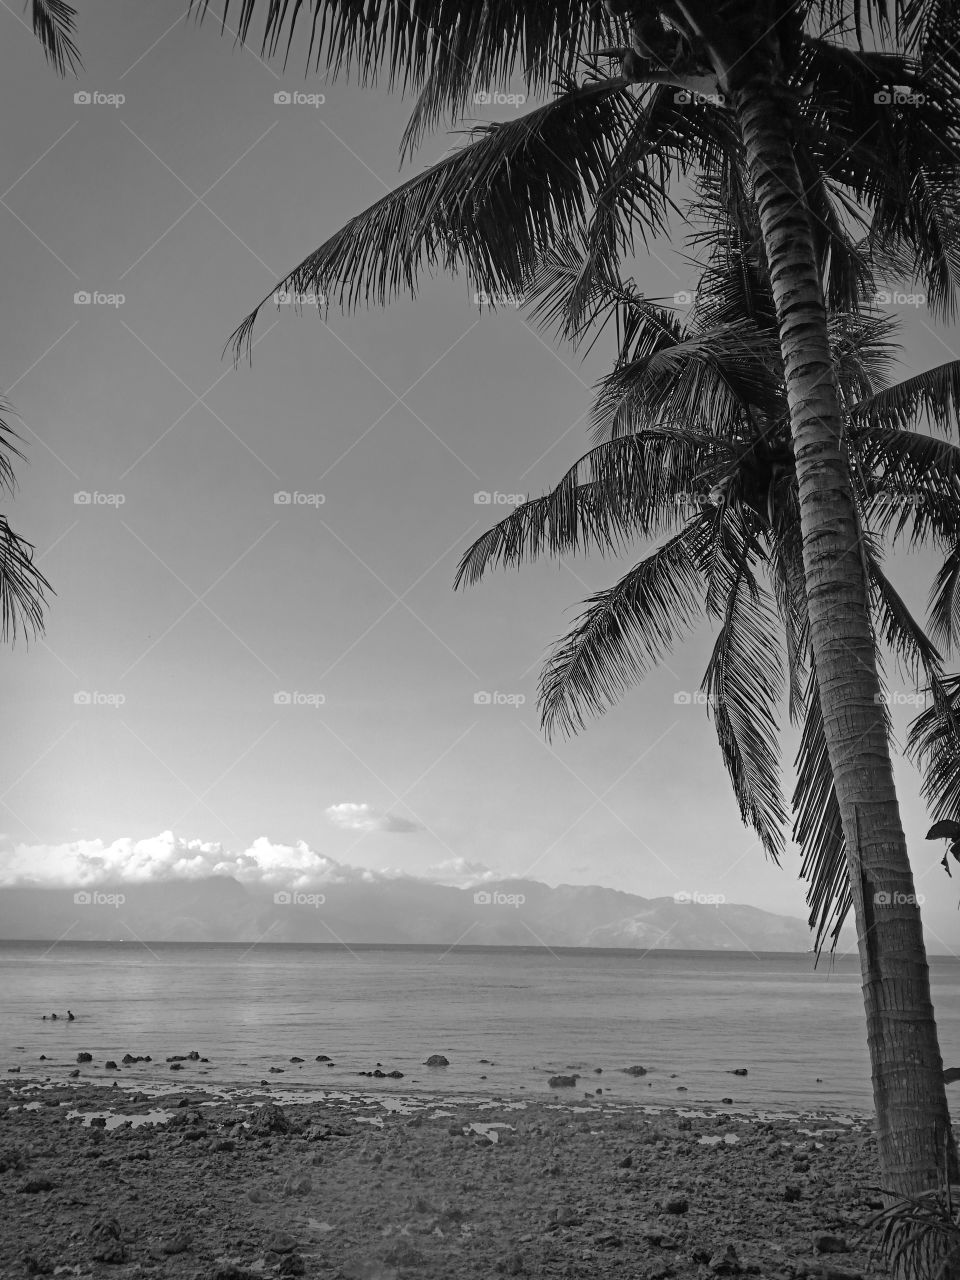 sky, trees, sea and mountain.. undeniable beauty of nature in black and white